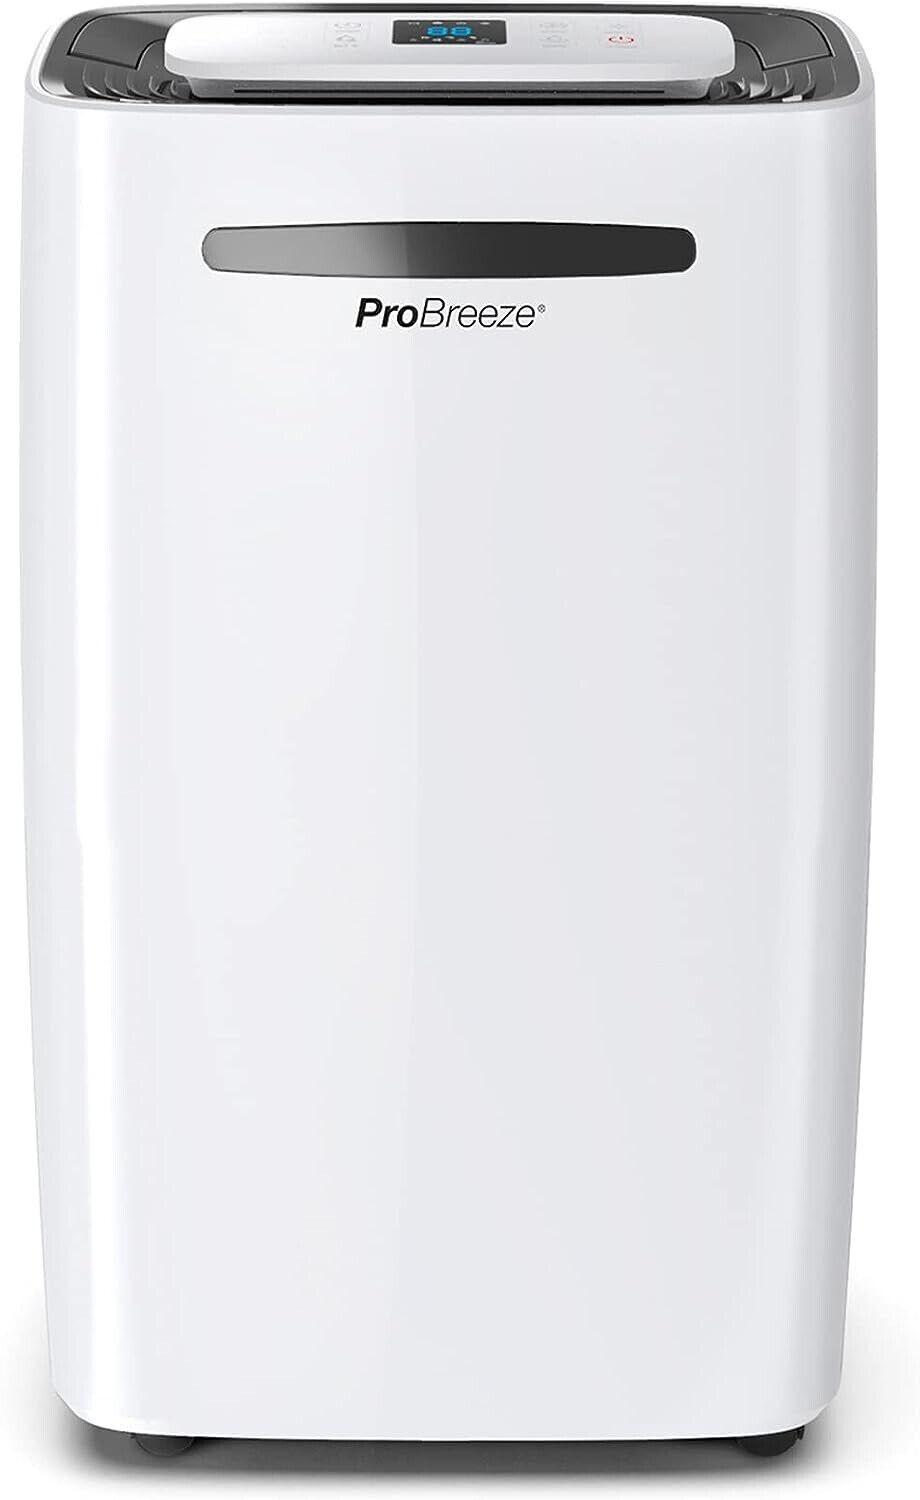 Pro Breeze 50 Pint Dehumidifier - 4,000 Sq Ft Dehumidifiers for Home Large